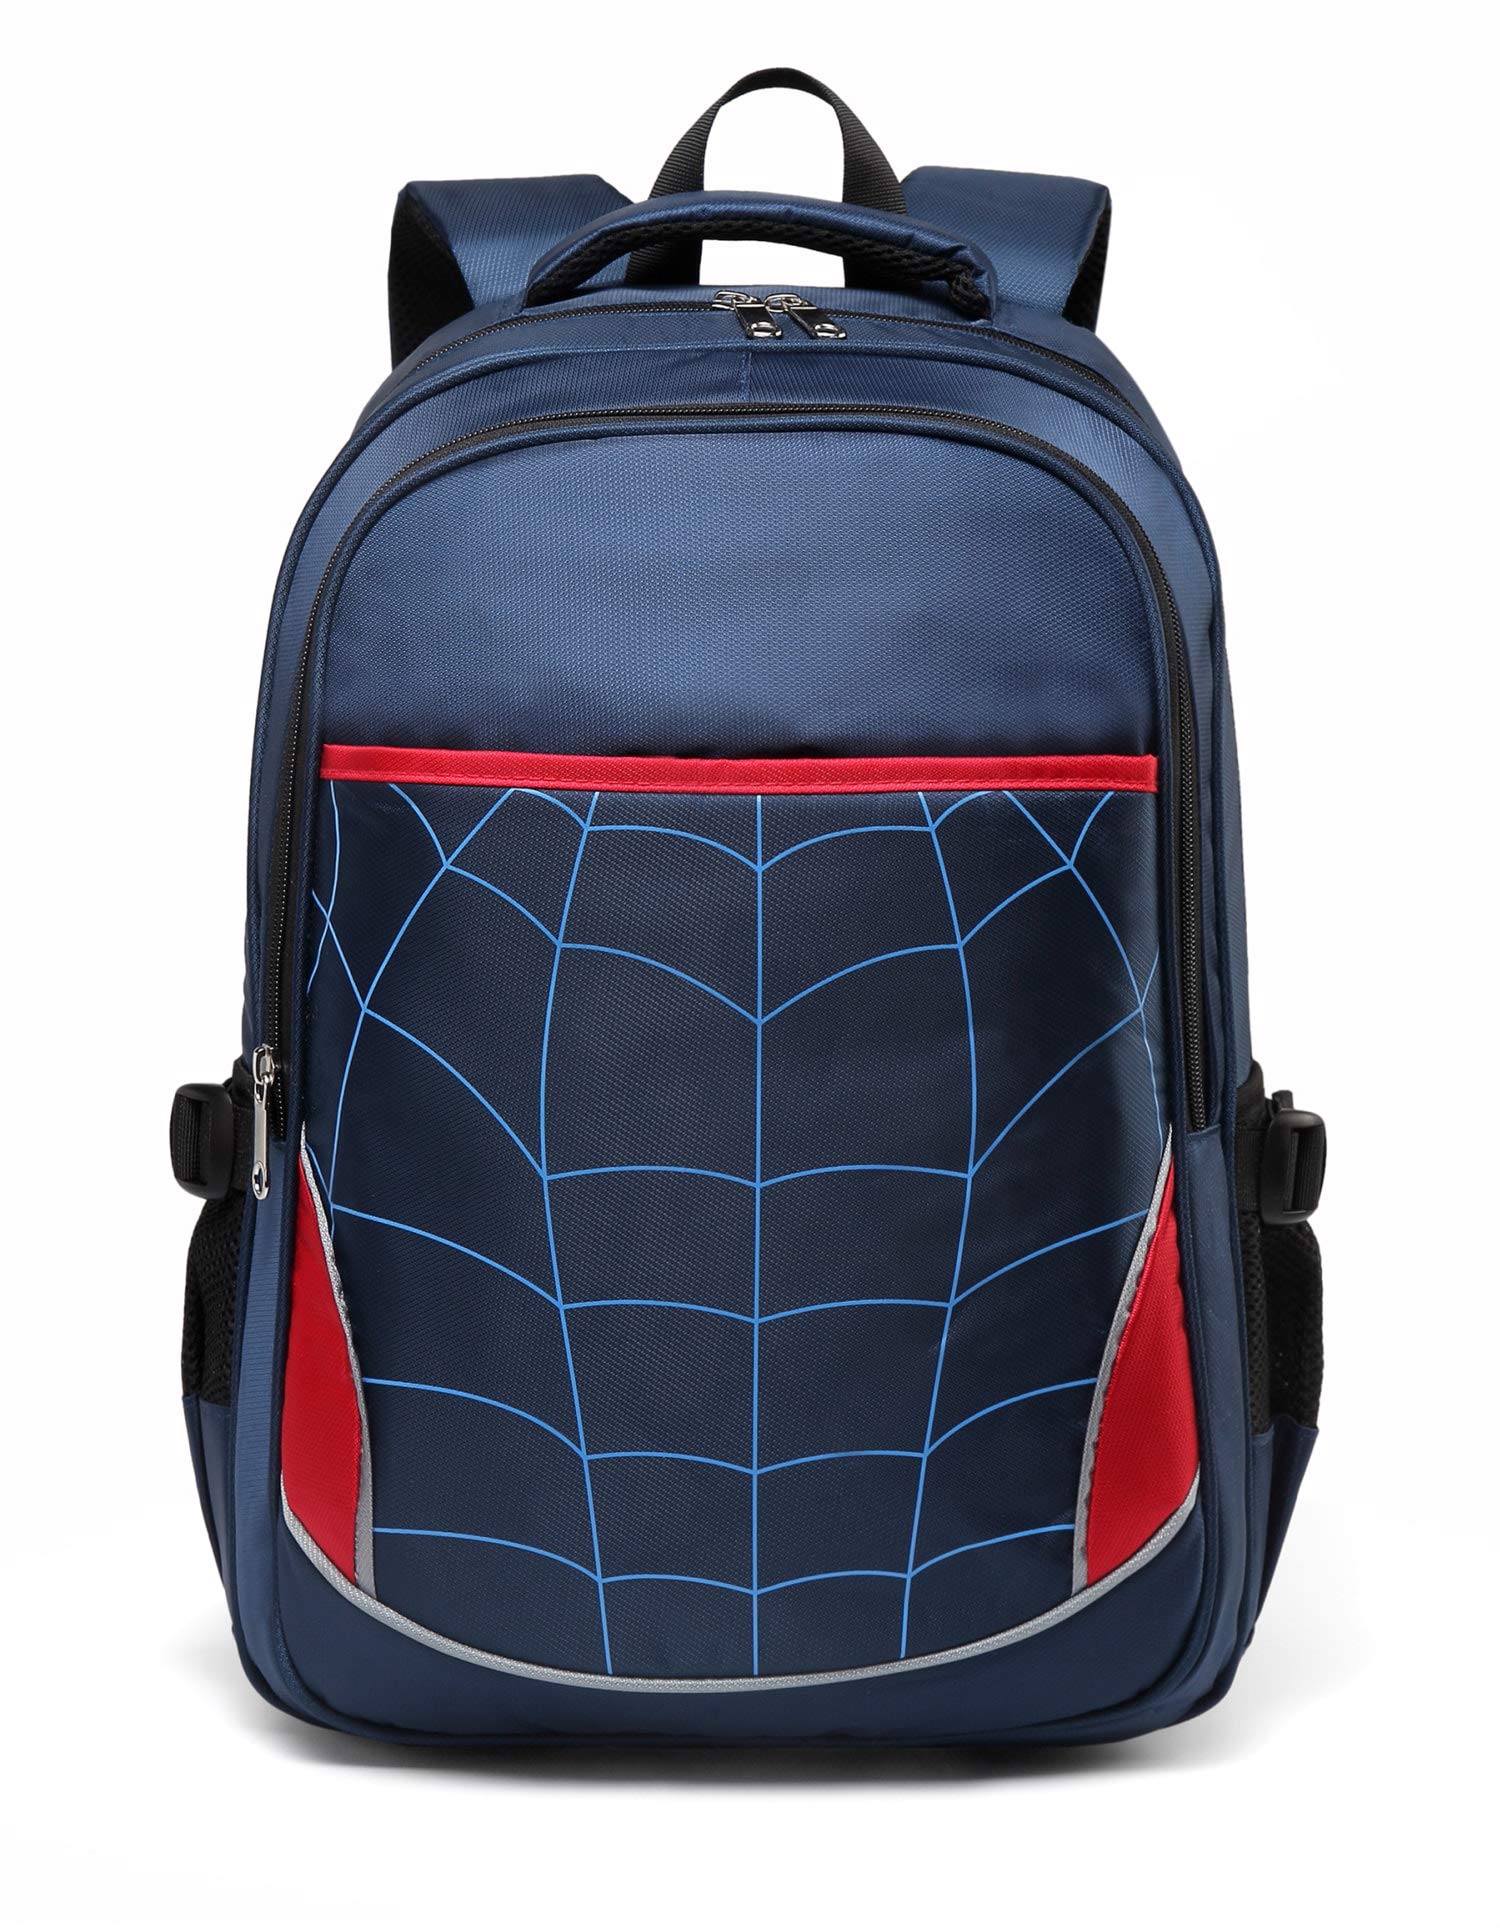 Best Backpack for First Grade